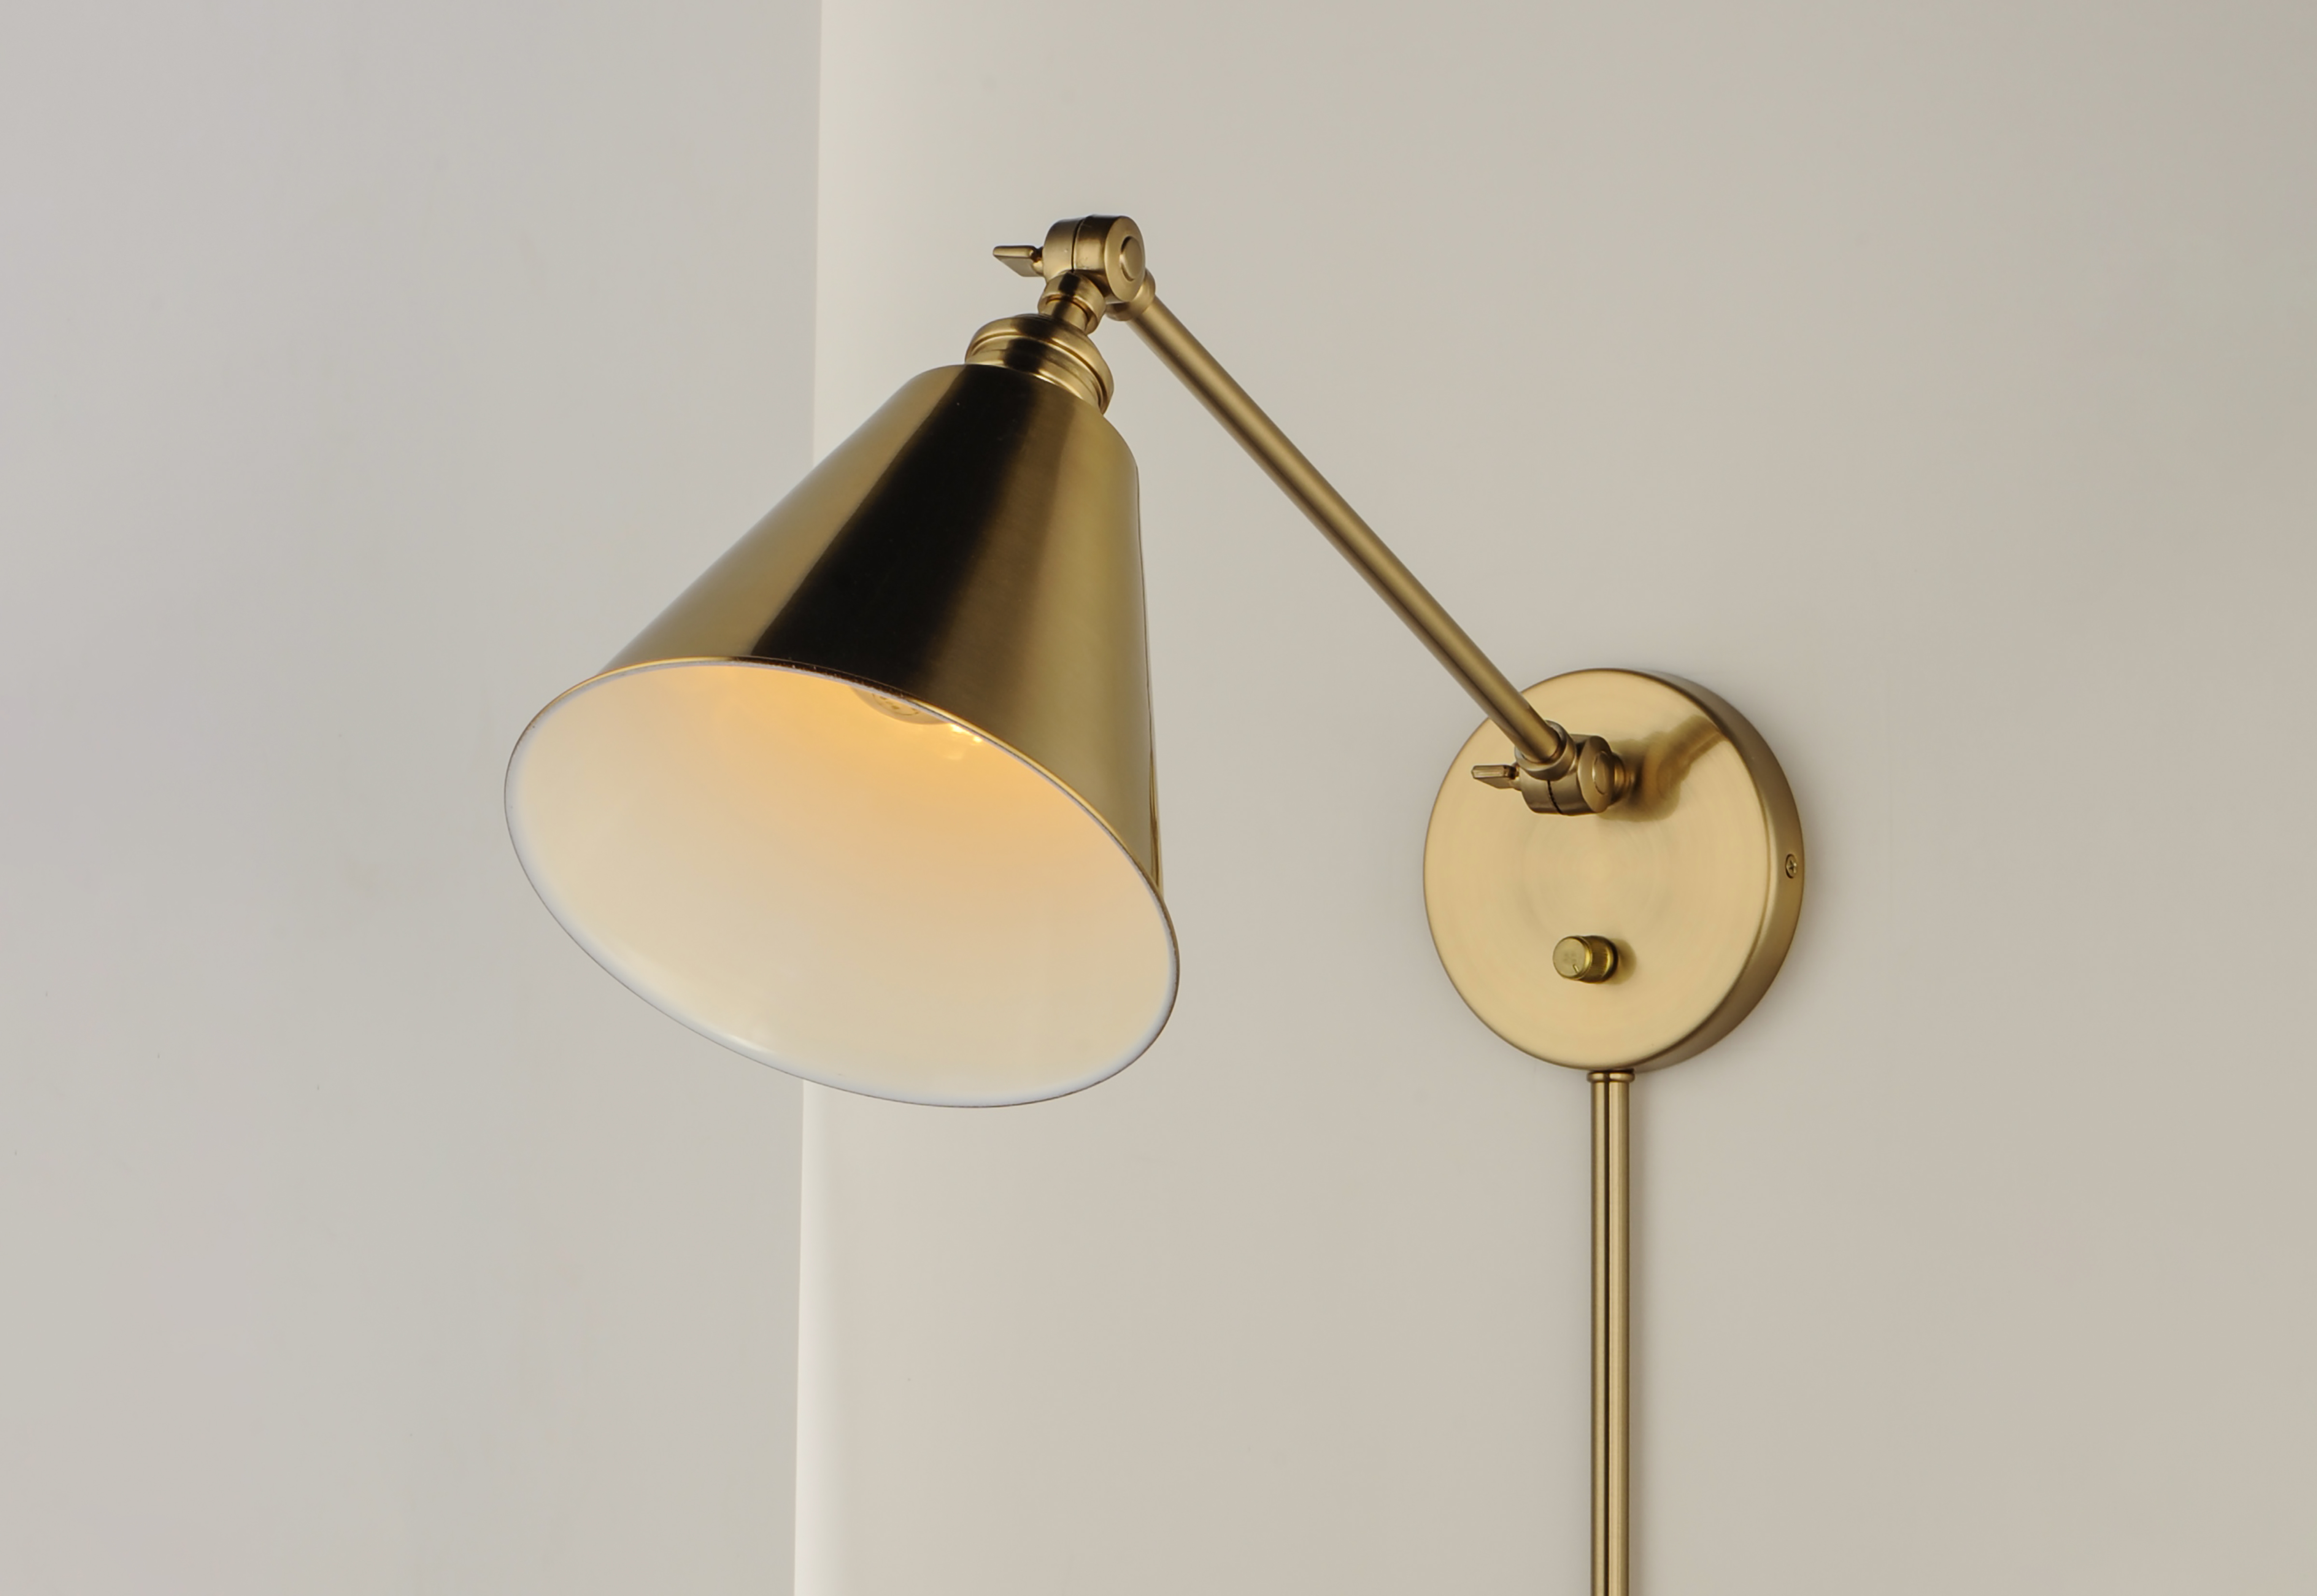 Library Wall Sconce - Wall Sconce - Maxim Lighting